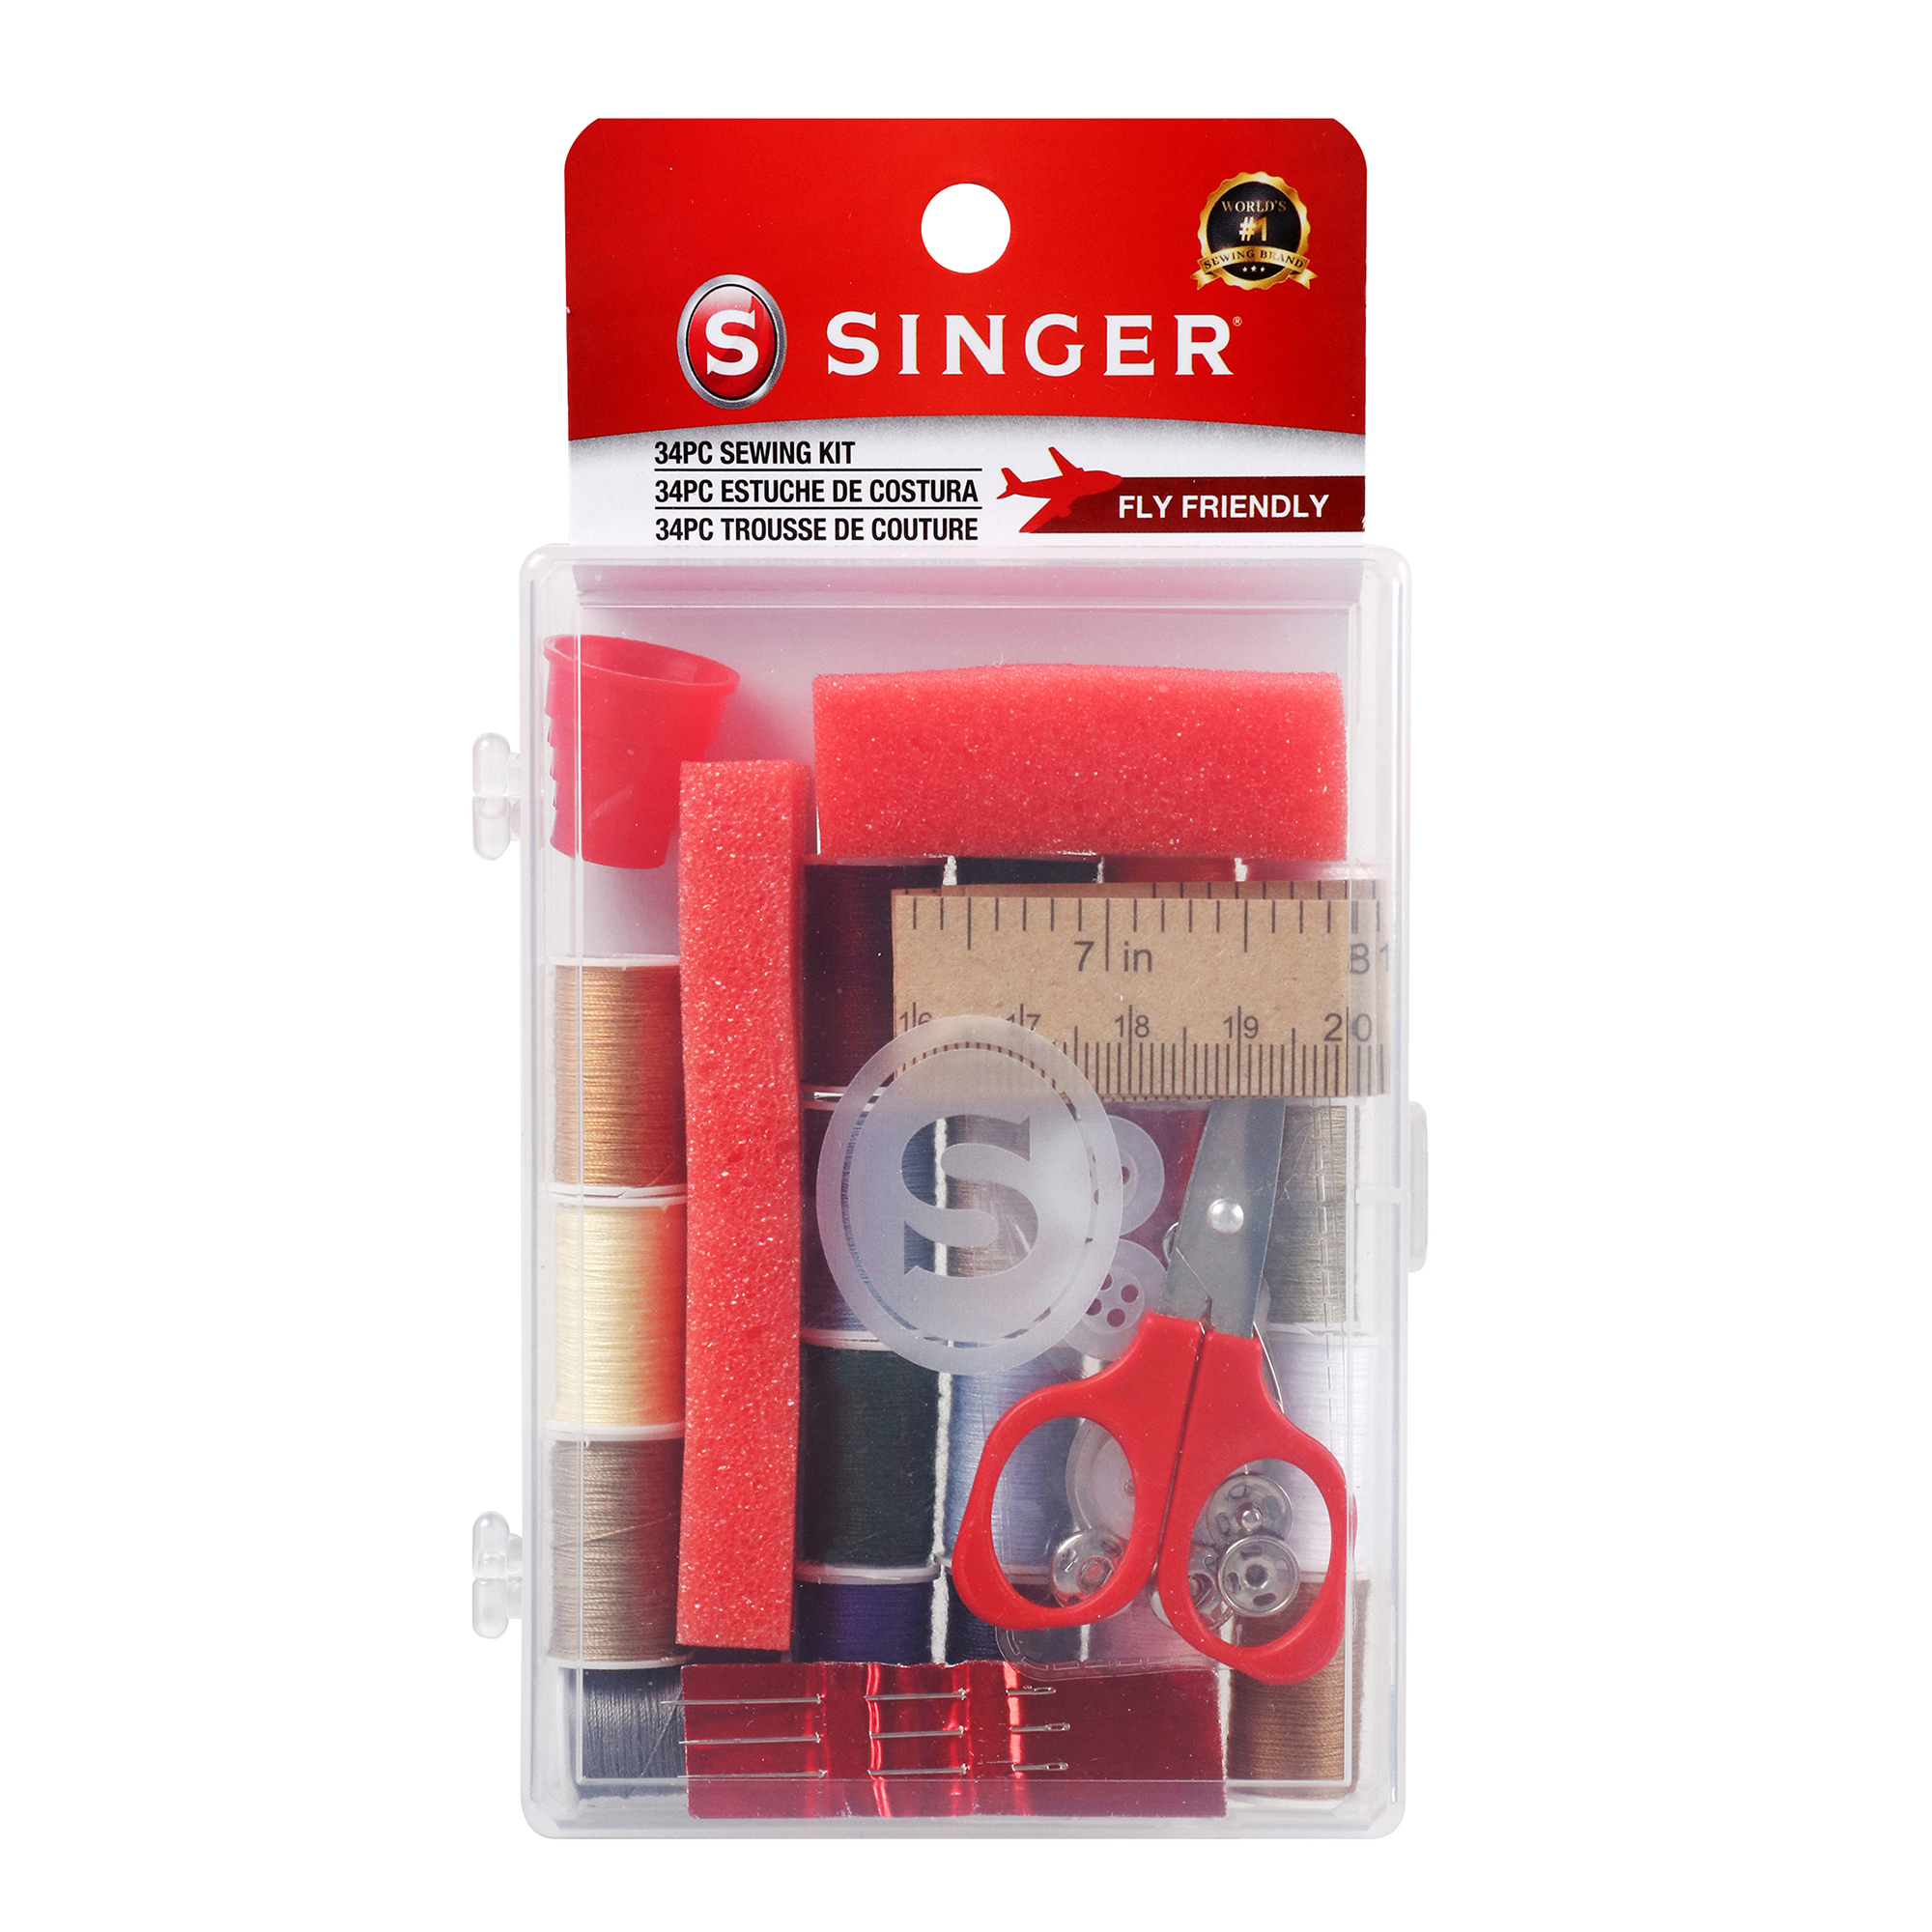 Deluxe Sewing Kit- - image 1 of 6